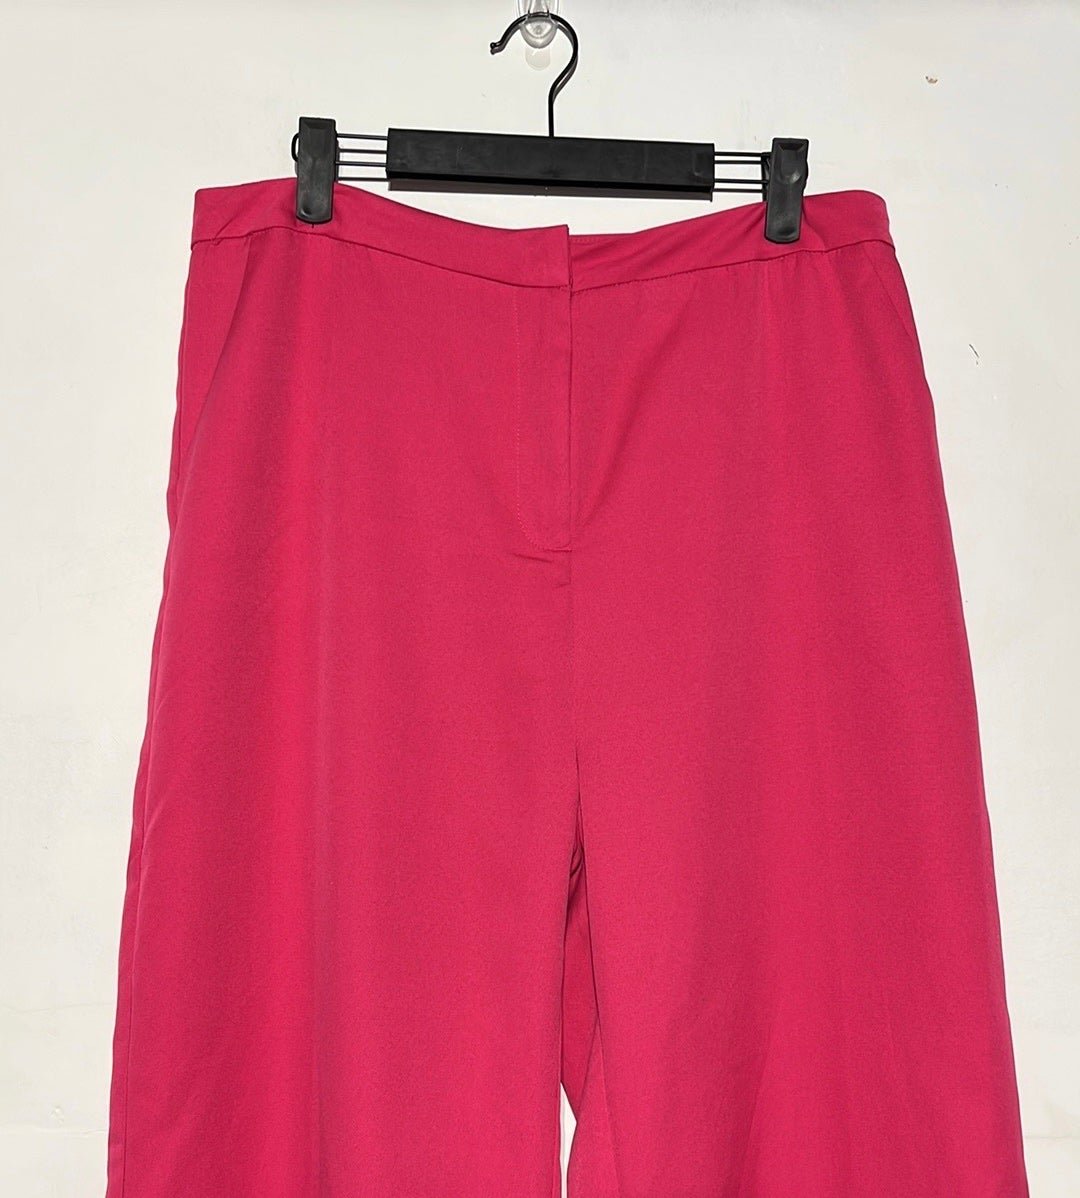 Promotions  NEW Nasty Gal Hot Pink Tailored High Waisted Wide Leg Pants Size 10 OWkexsUq5 Online Shop